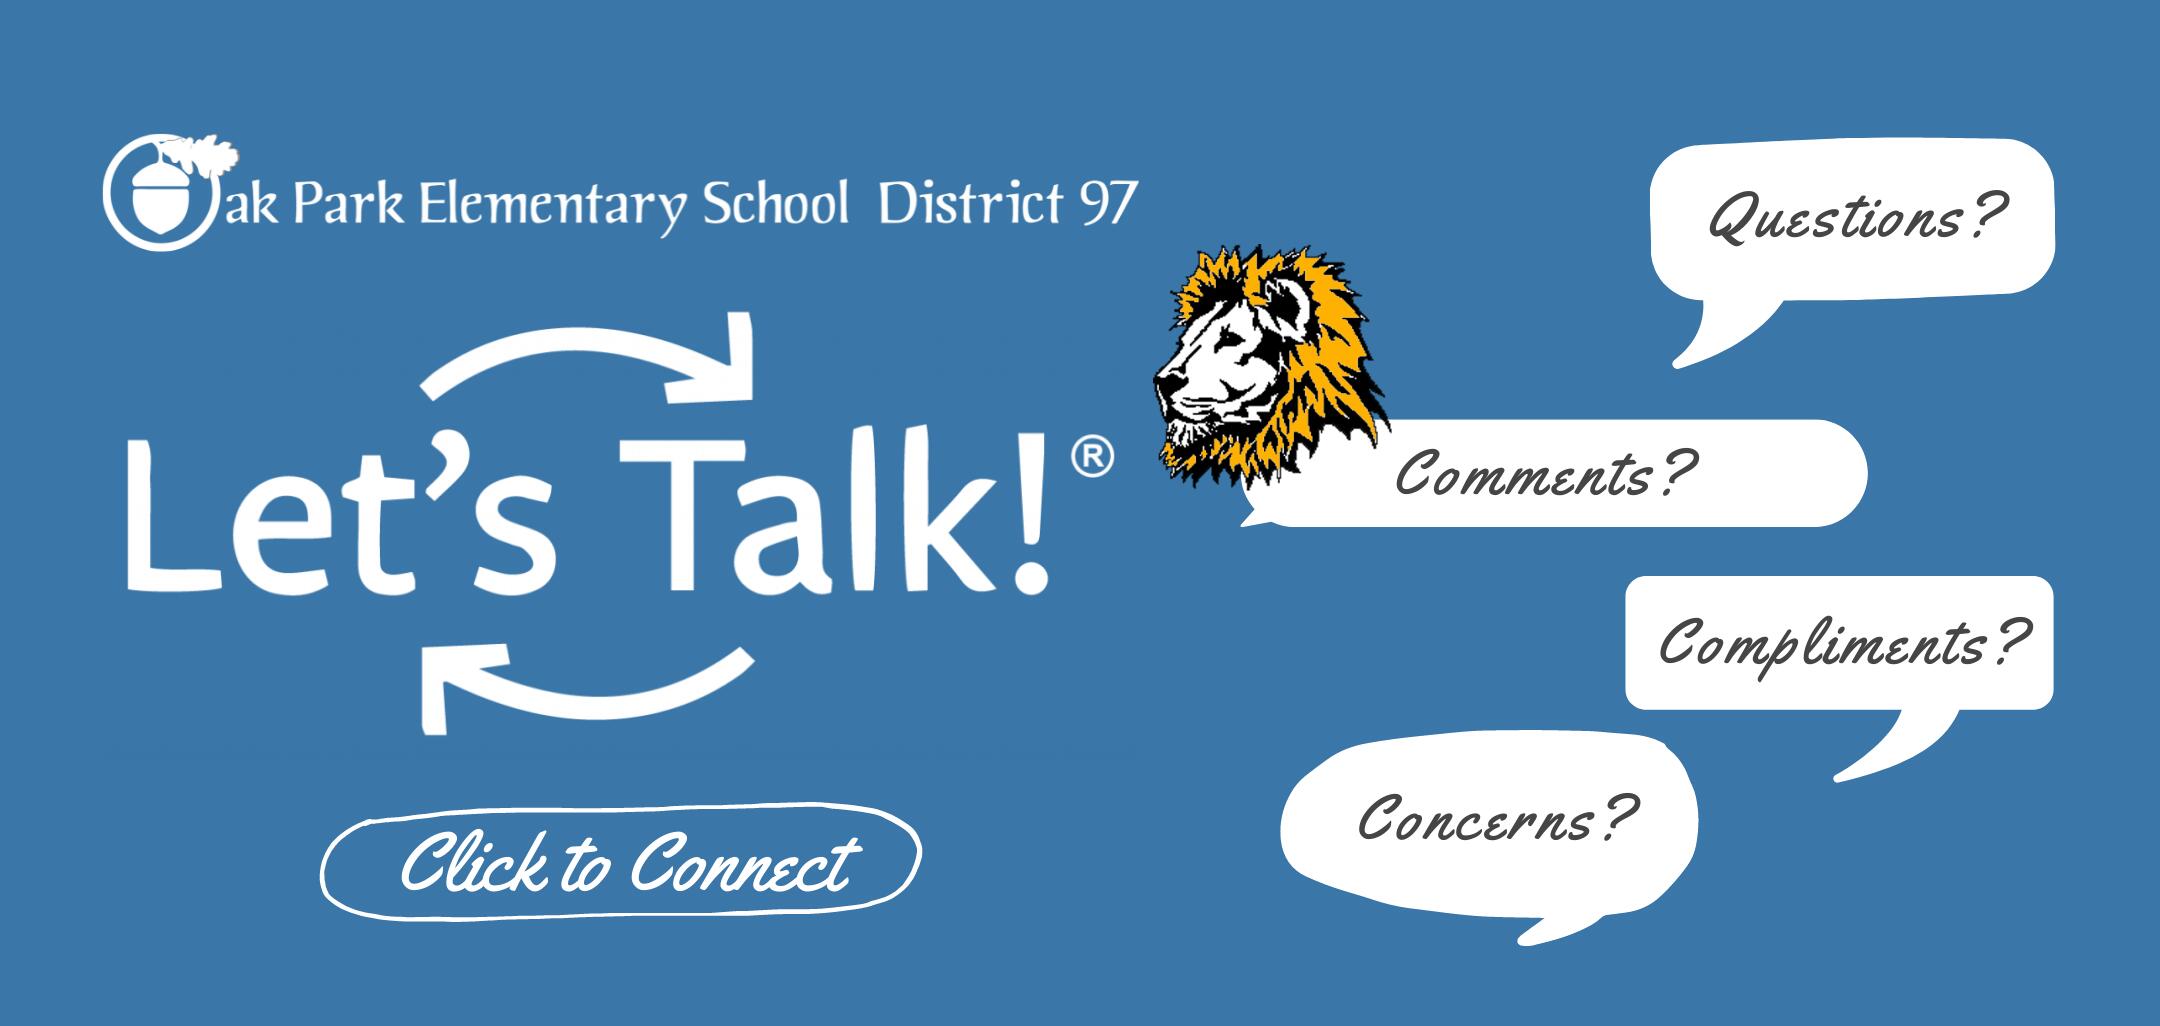 Click to share questions, concerns or compliment via Let's Talk!